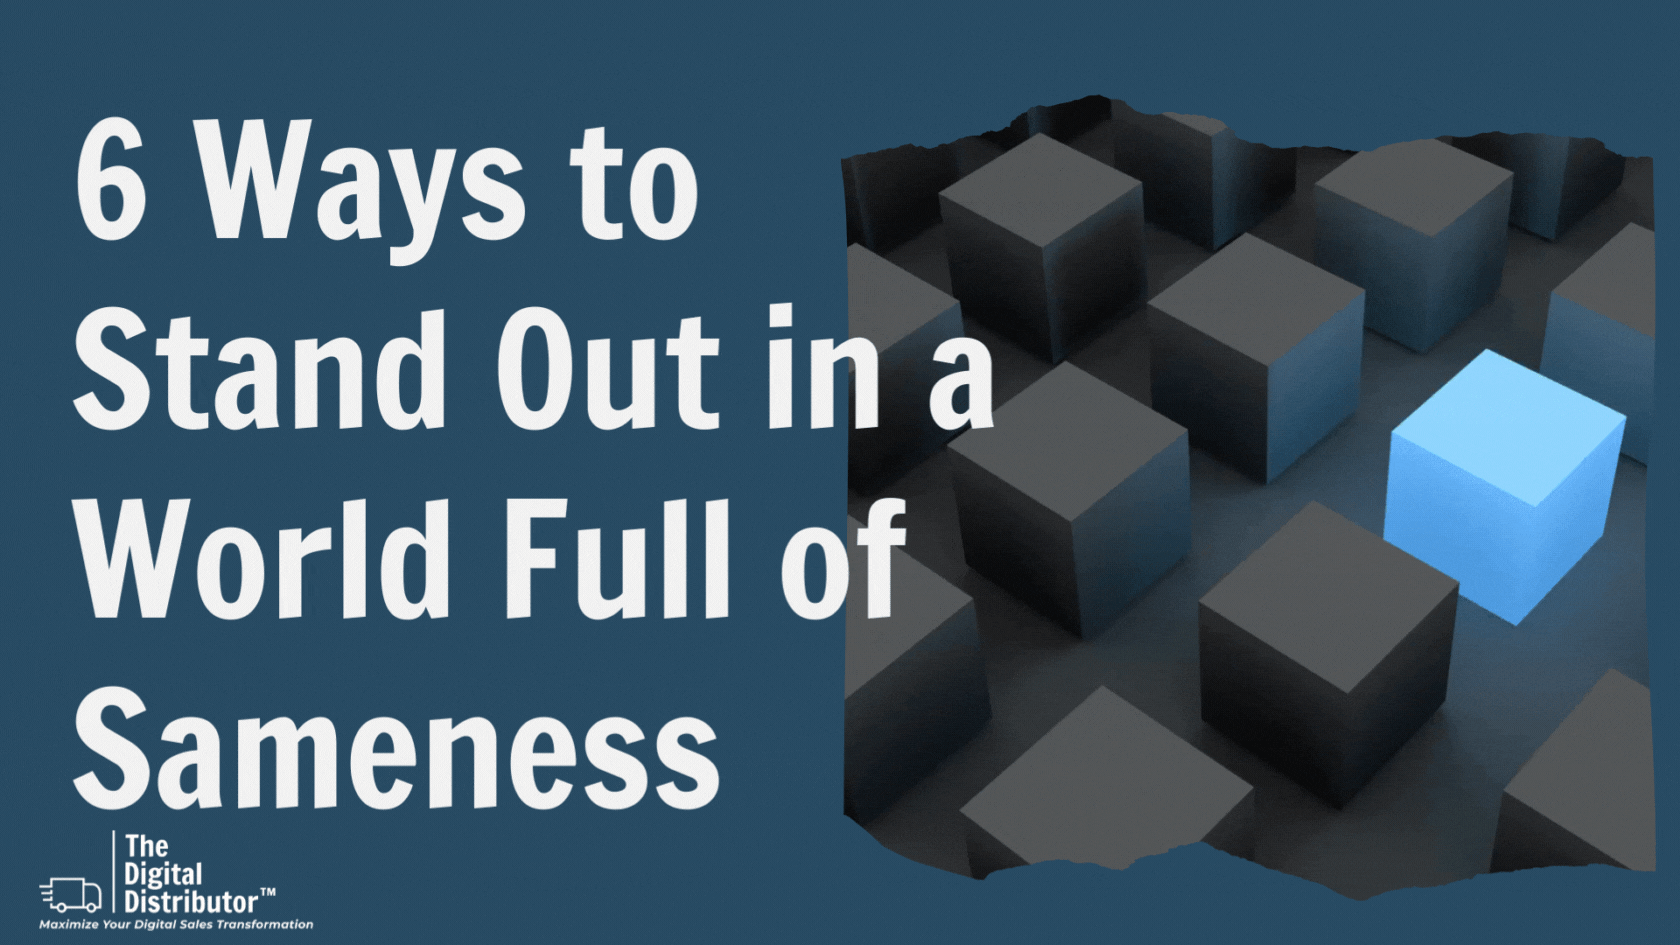 6 Ways to Stand Out in a World Full of Sameness